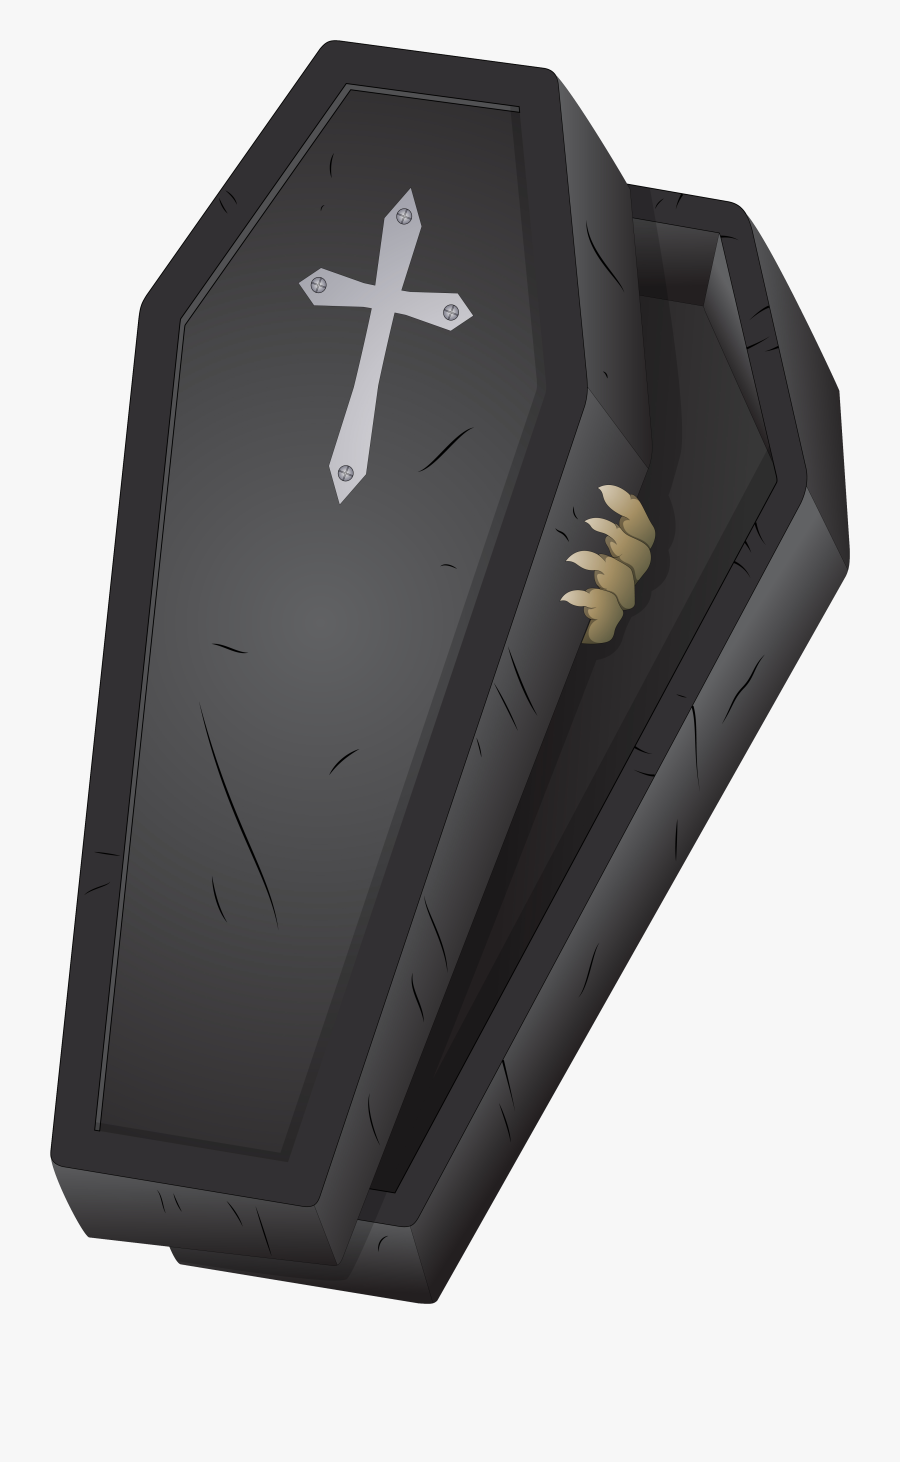 Halloween Black Coffin Png Picture - Halloween Coffin Clipart, Transparent Clipart